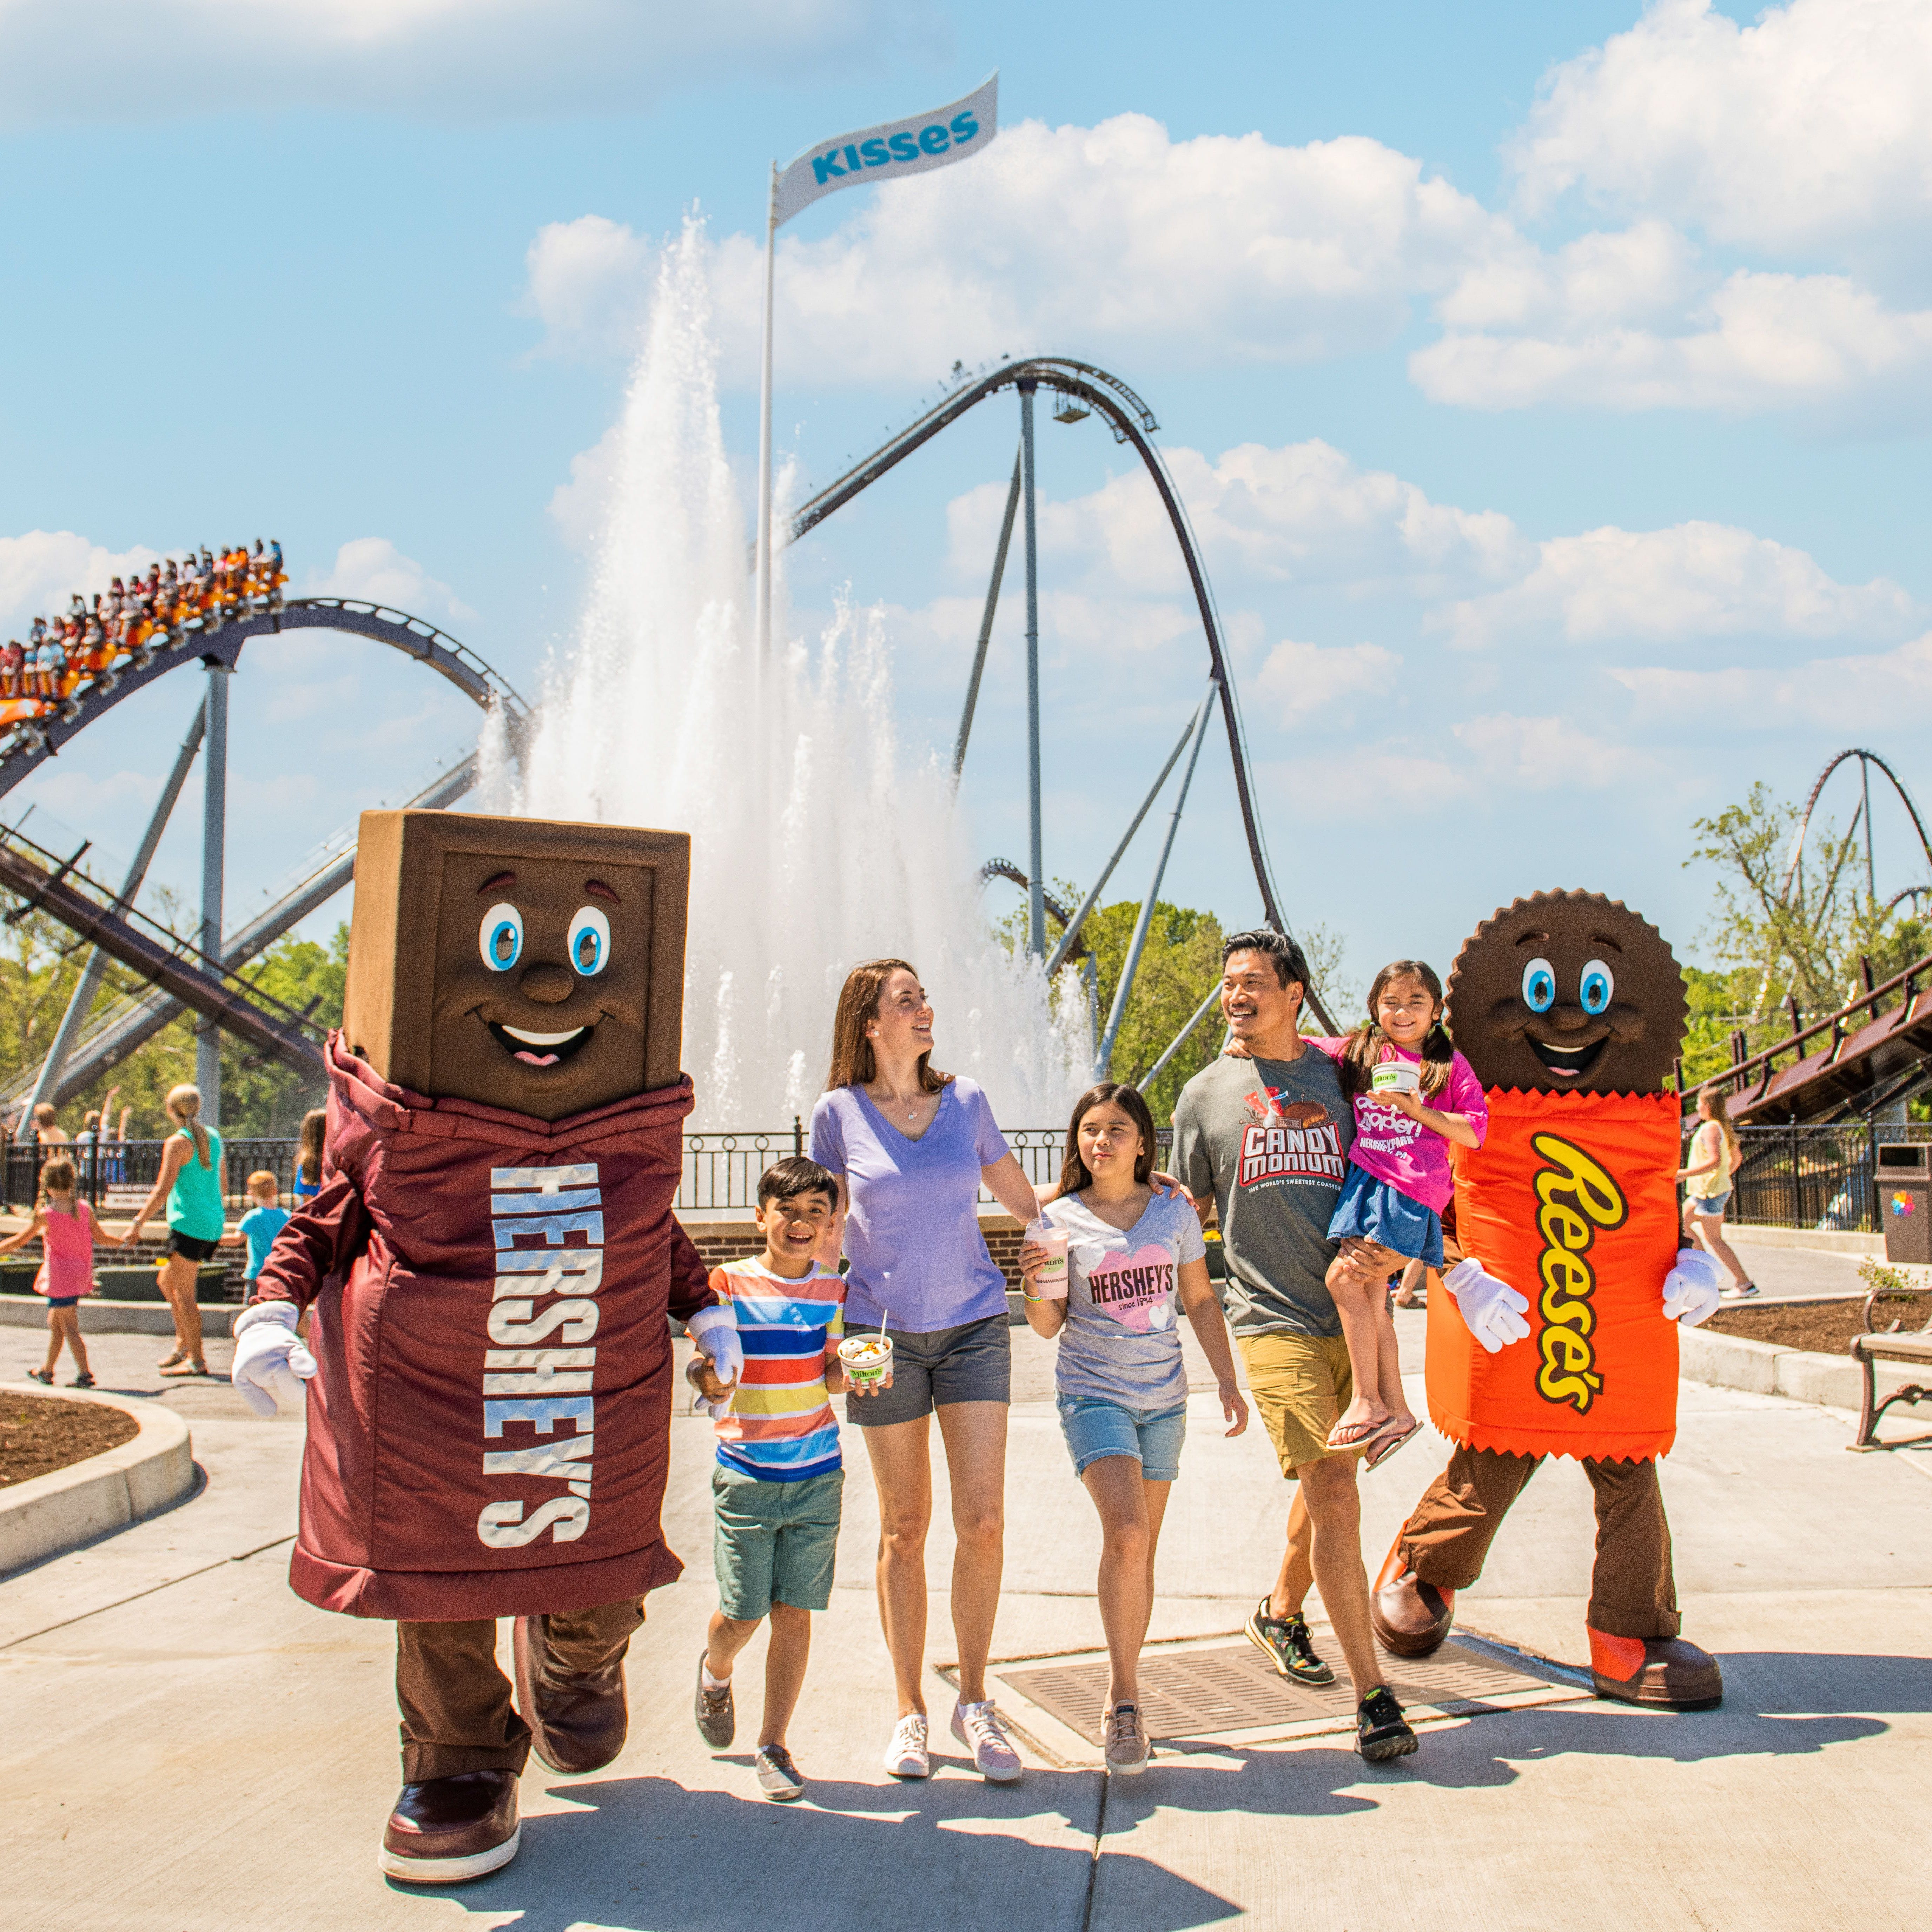 Guests can meet larger-than-life Hershey's candy characters at both Hersheypark and Hershey's Chocolate World.